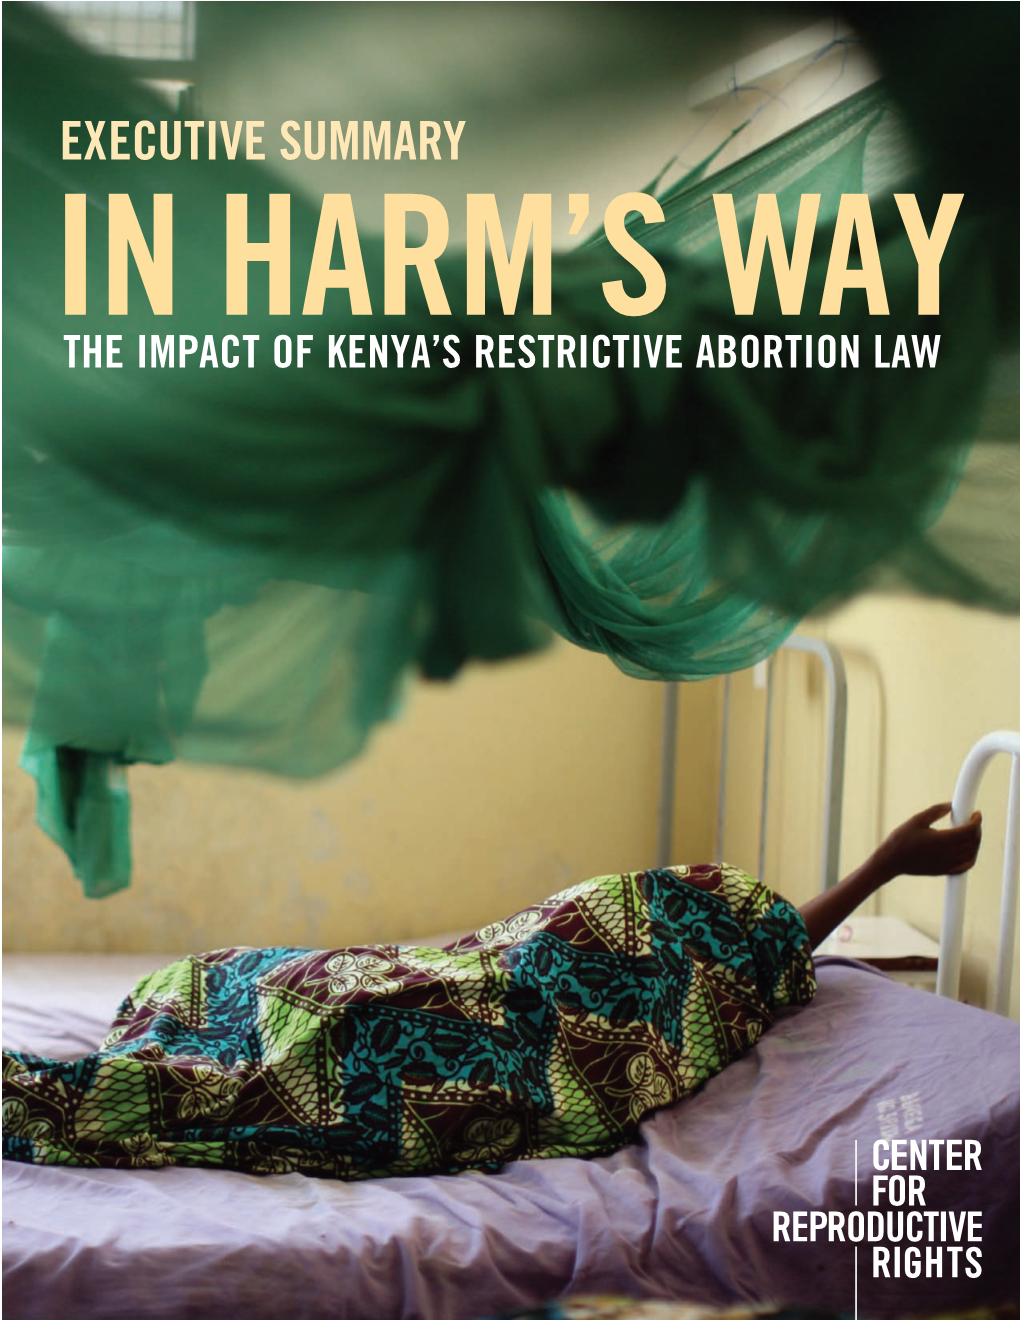 EXECUTIVE SUMMARY in HARM’S WAY the IMPACT of KENYA’S RESTRICTIVE ABORTION LAW © 2010 Center for Reproductive Rights